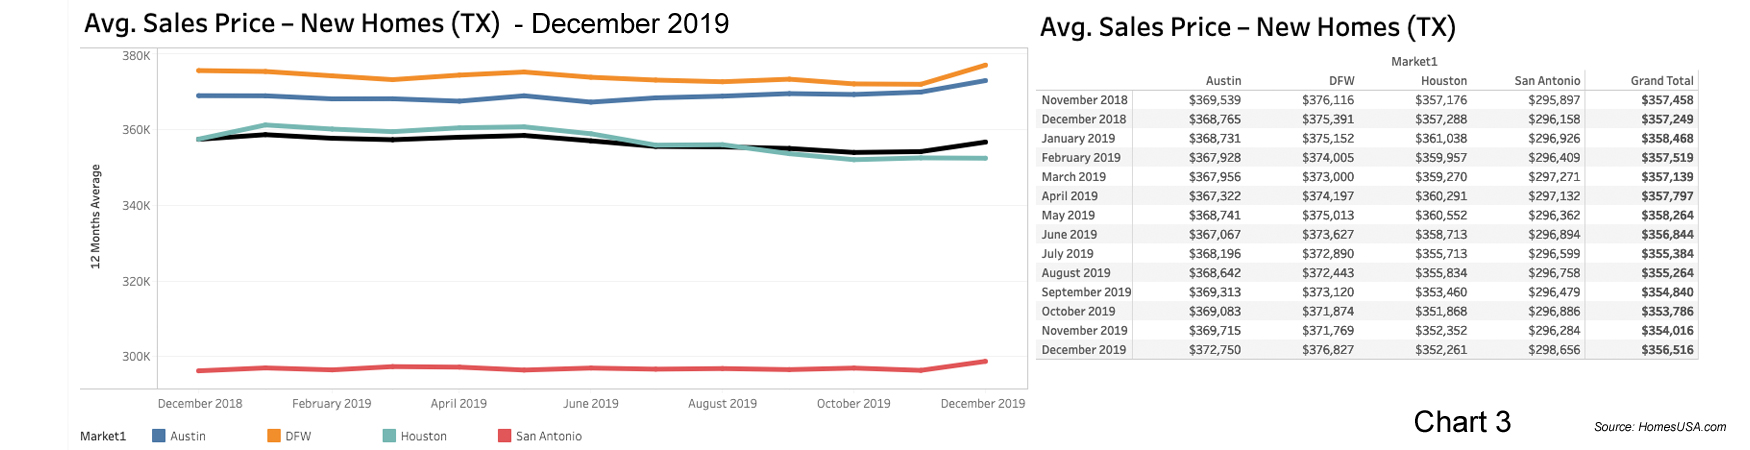 Chart 3: Texas New Home Prices - December 2019